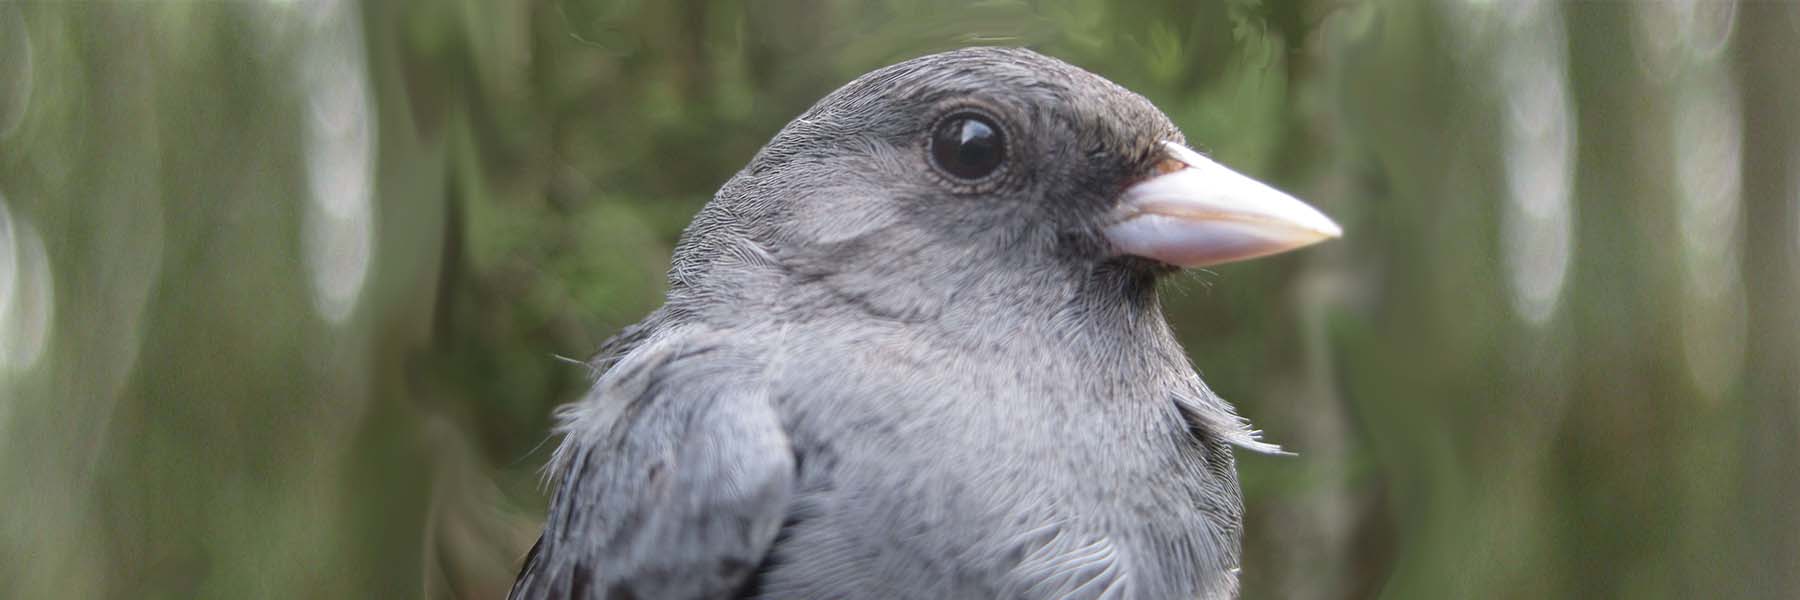 Close-up of Dark-eyed Junco, showing head and shoulders.